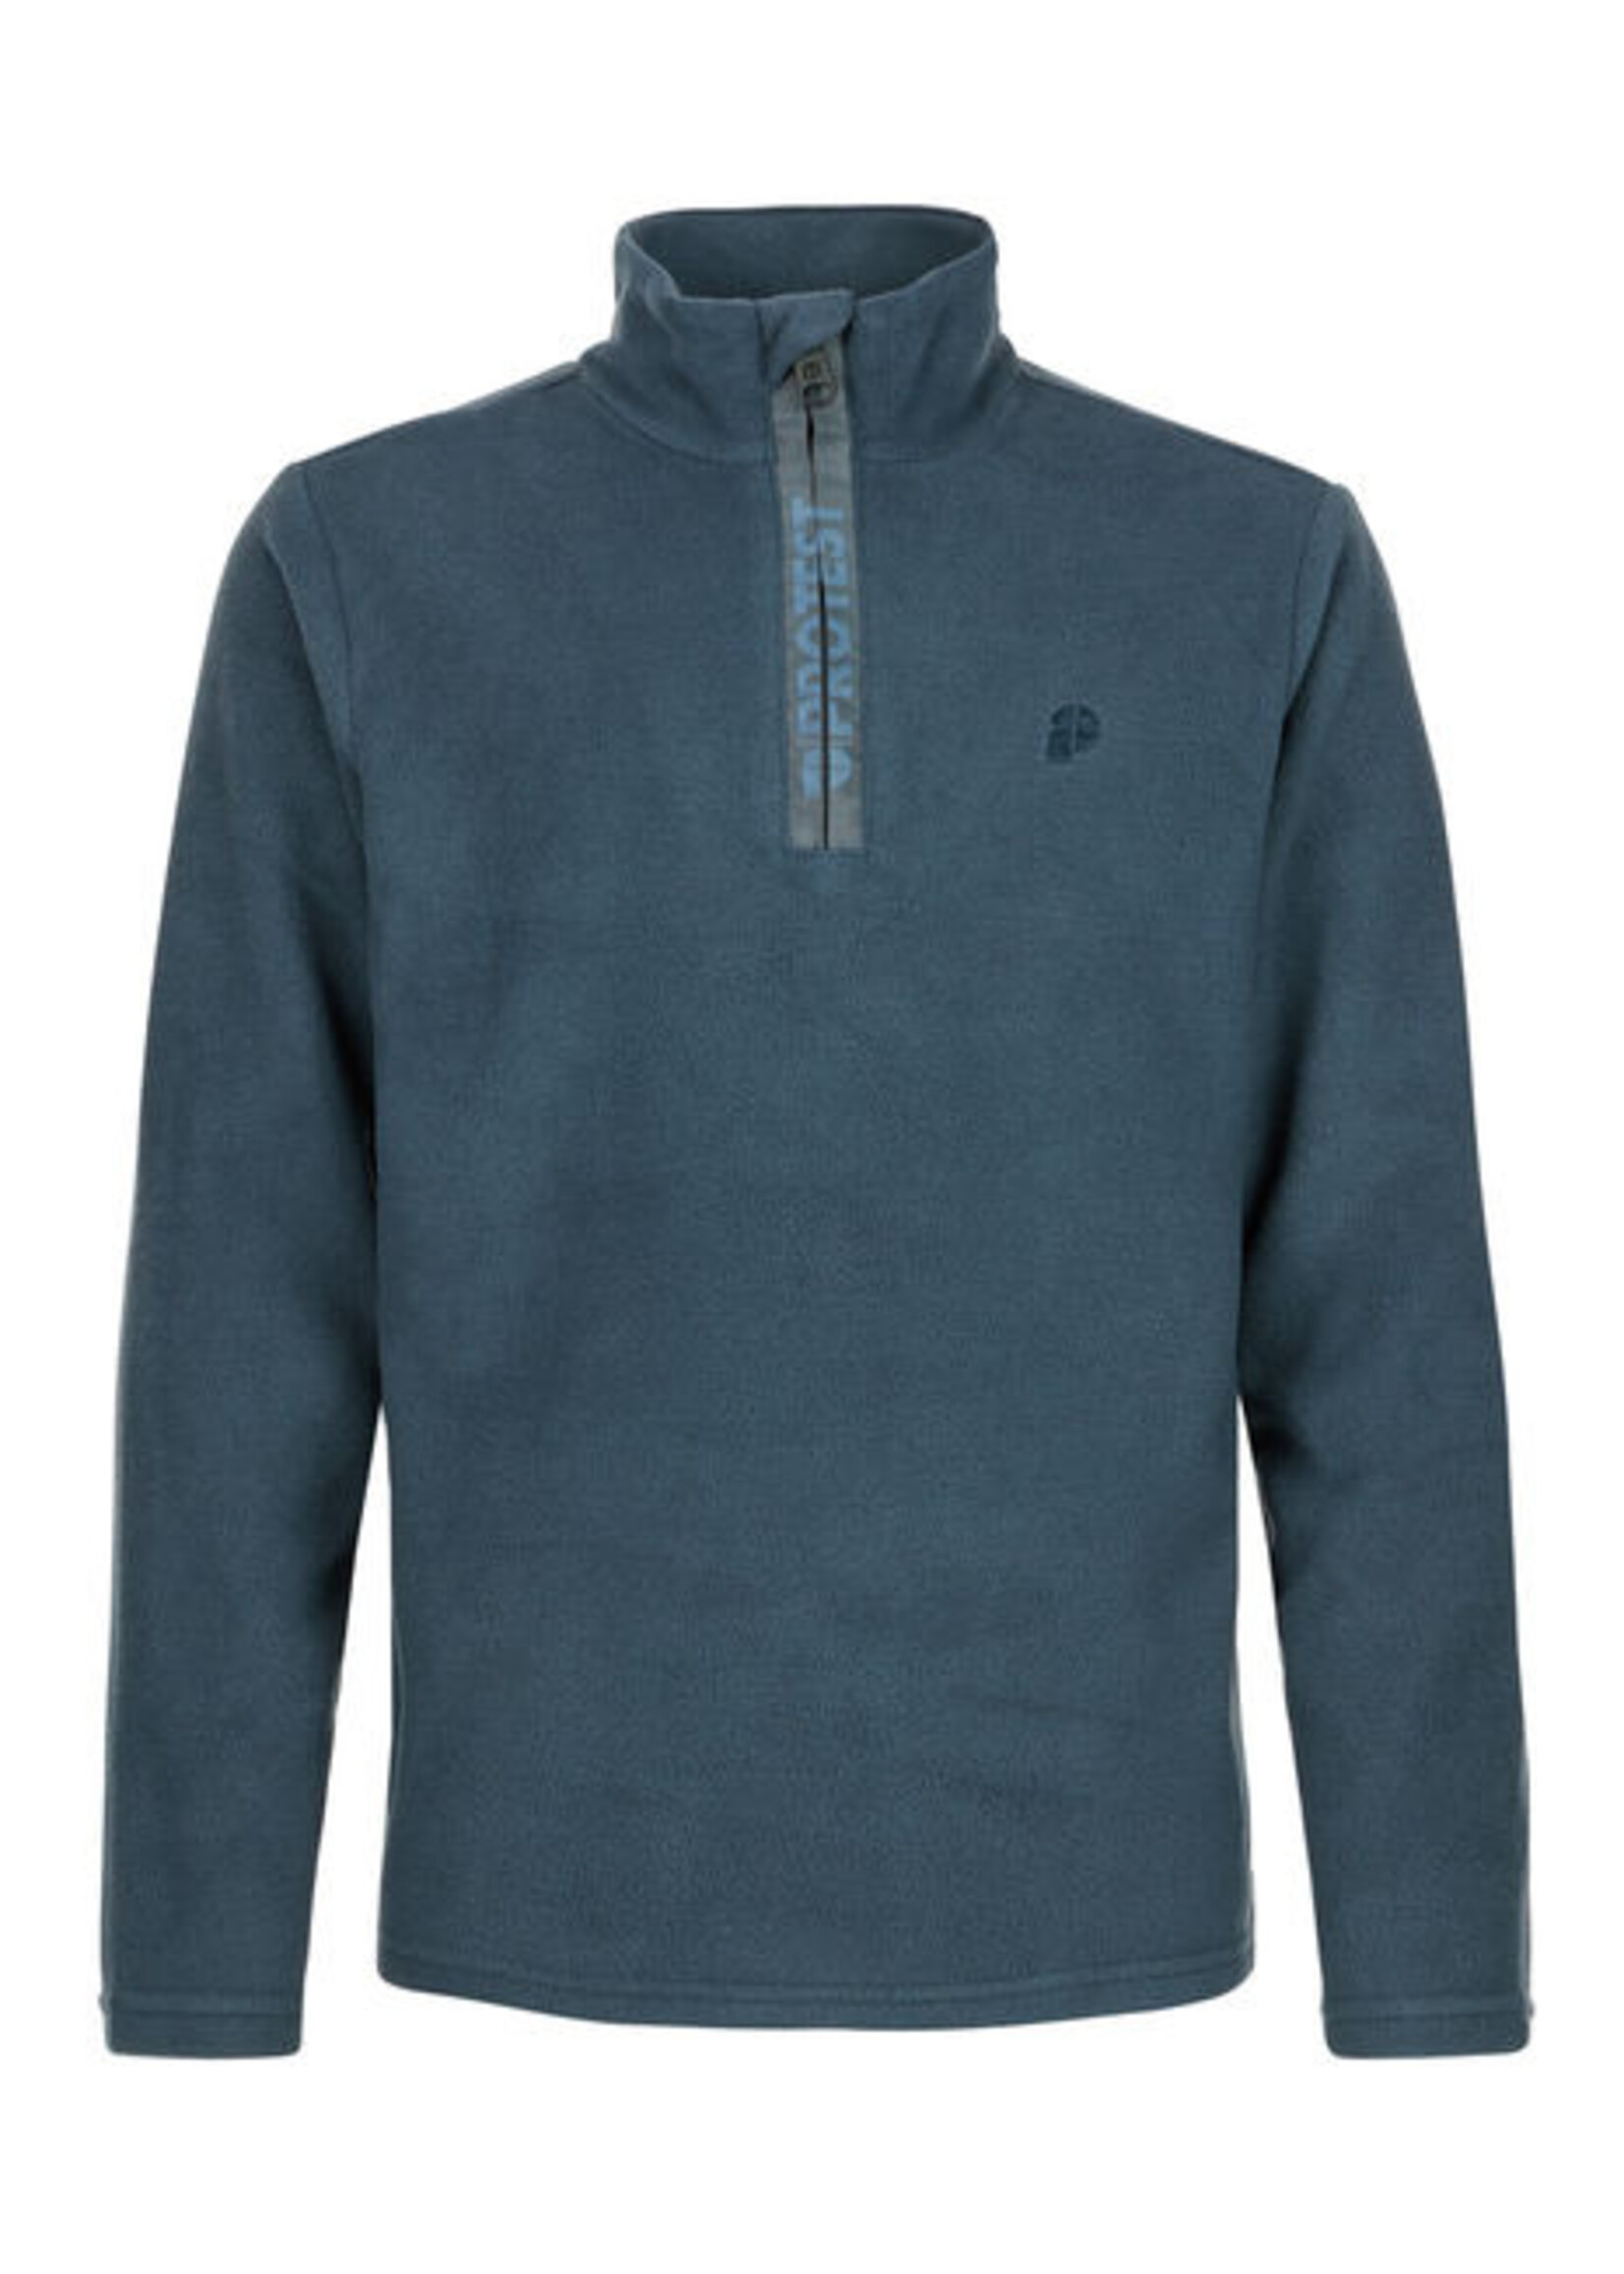 PROTEST  PERFECTY JR 1/4 zip top-Blue Nights